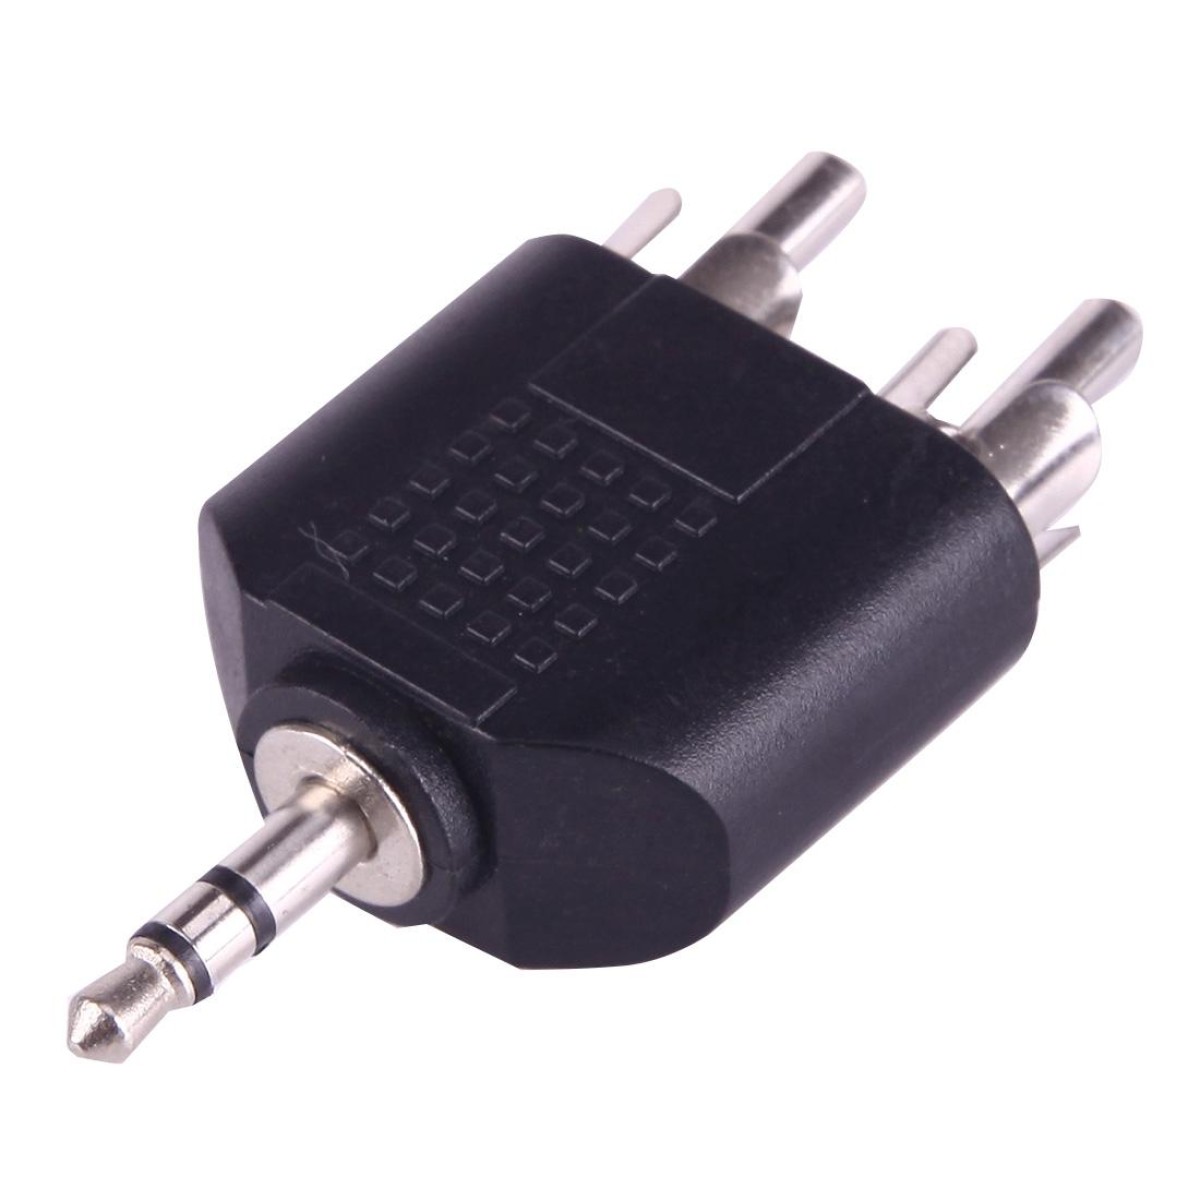 2 RCA Male to 3.5mm Male Jack Audio Y Adapter(Black)